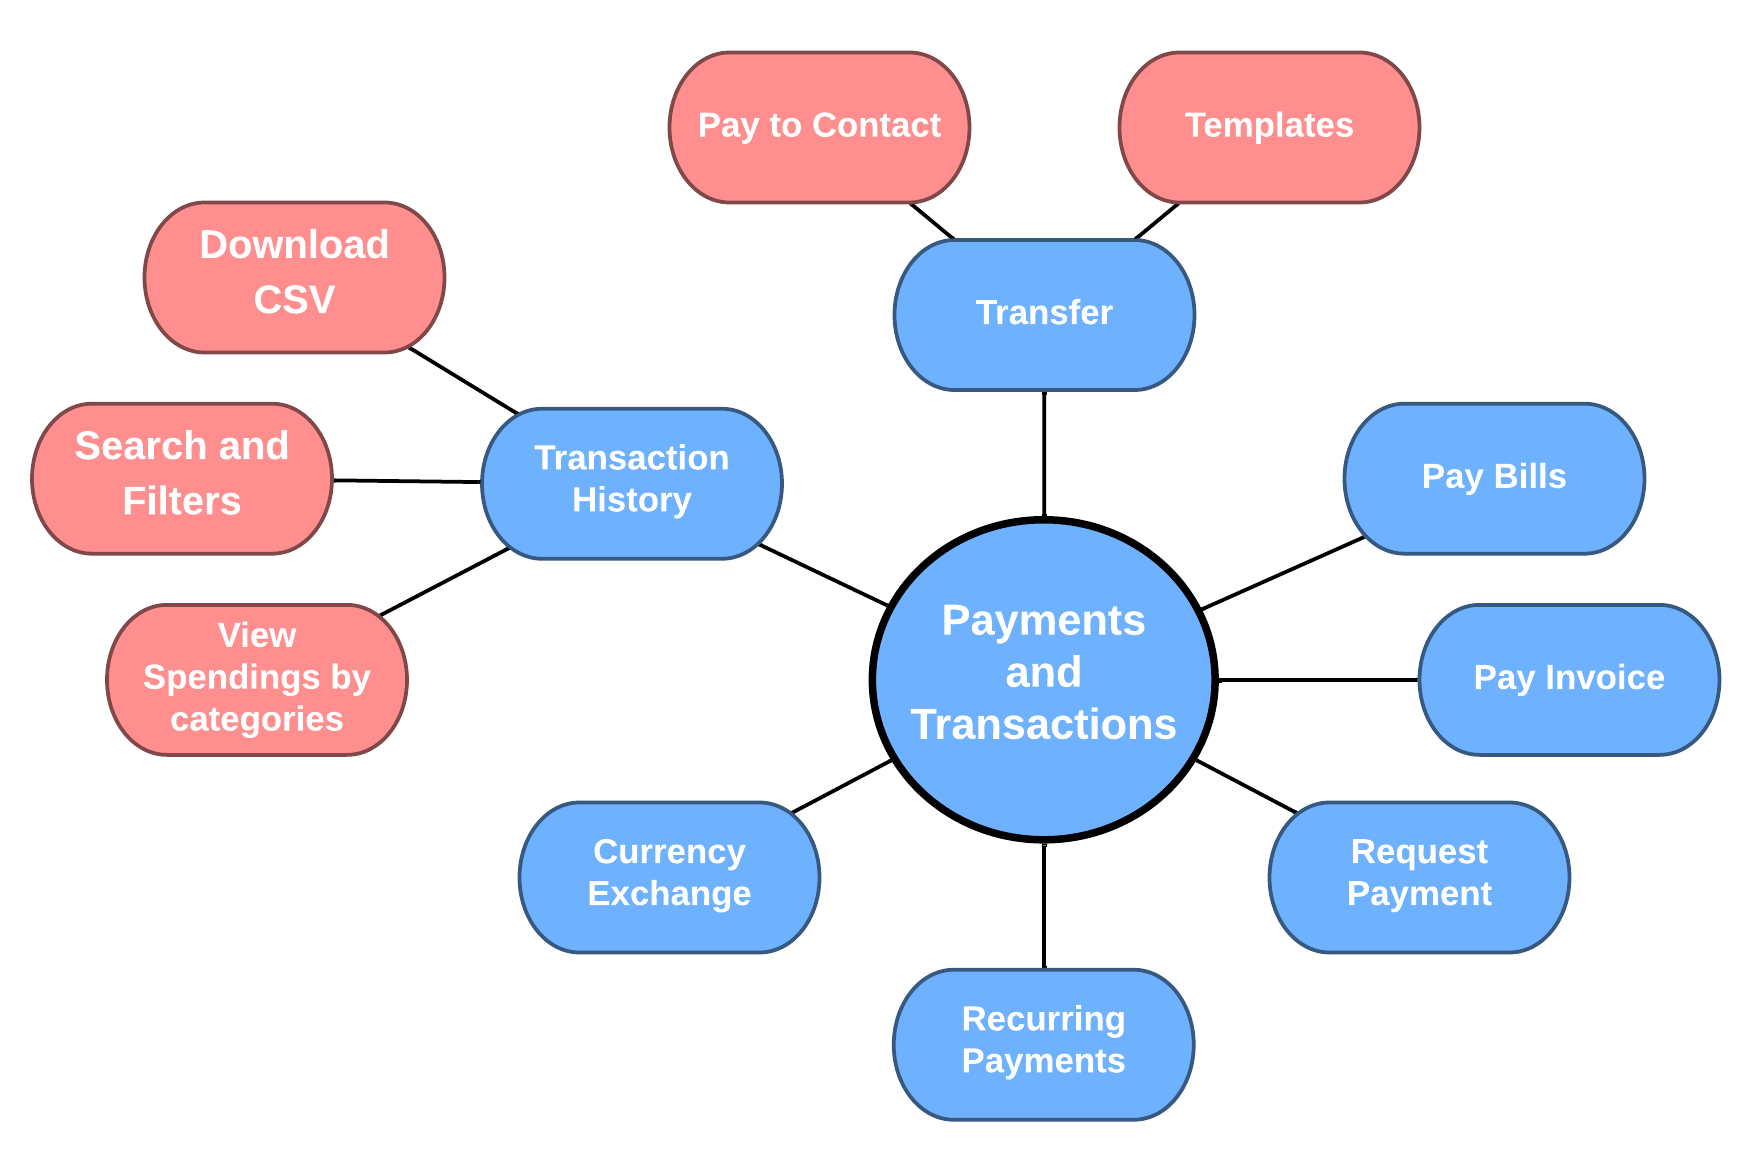 Payments and transactions